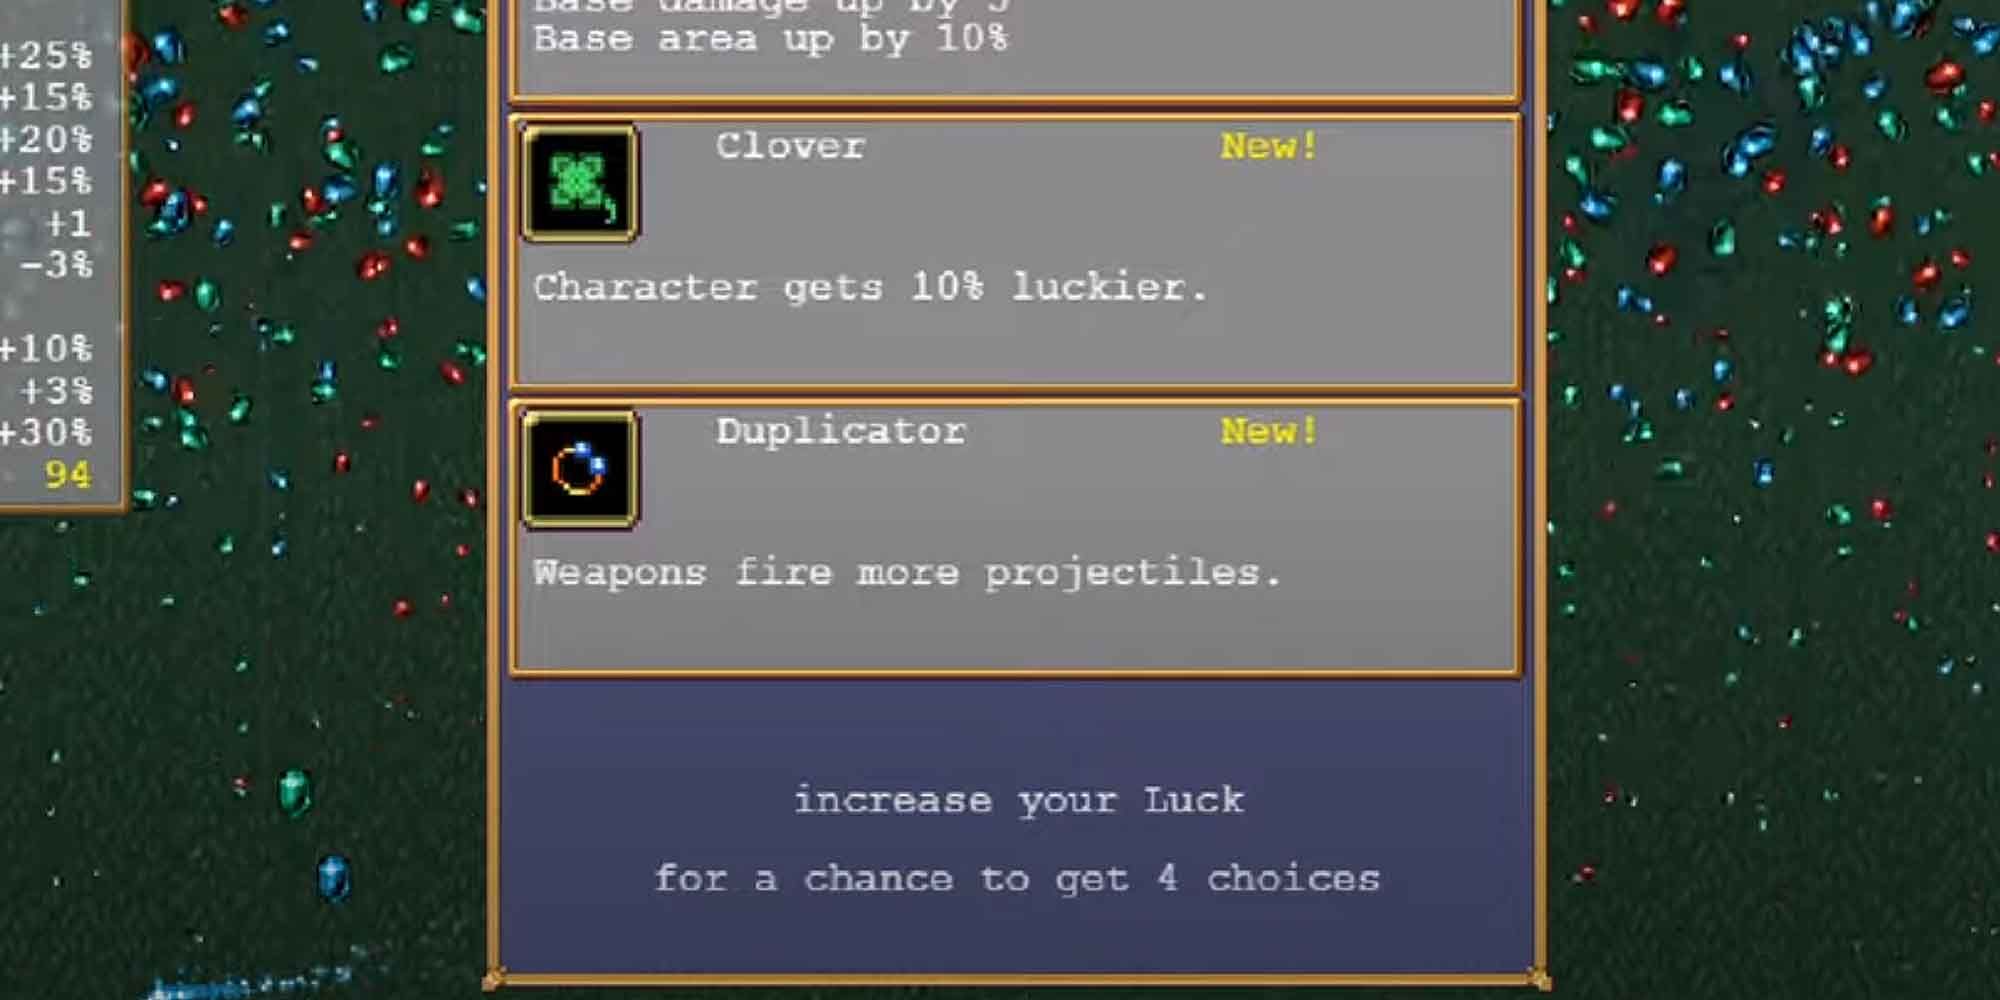 Getting the Duplicator as an option when leveling-up in Vampire Survivors